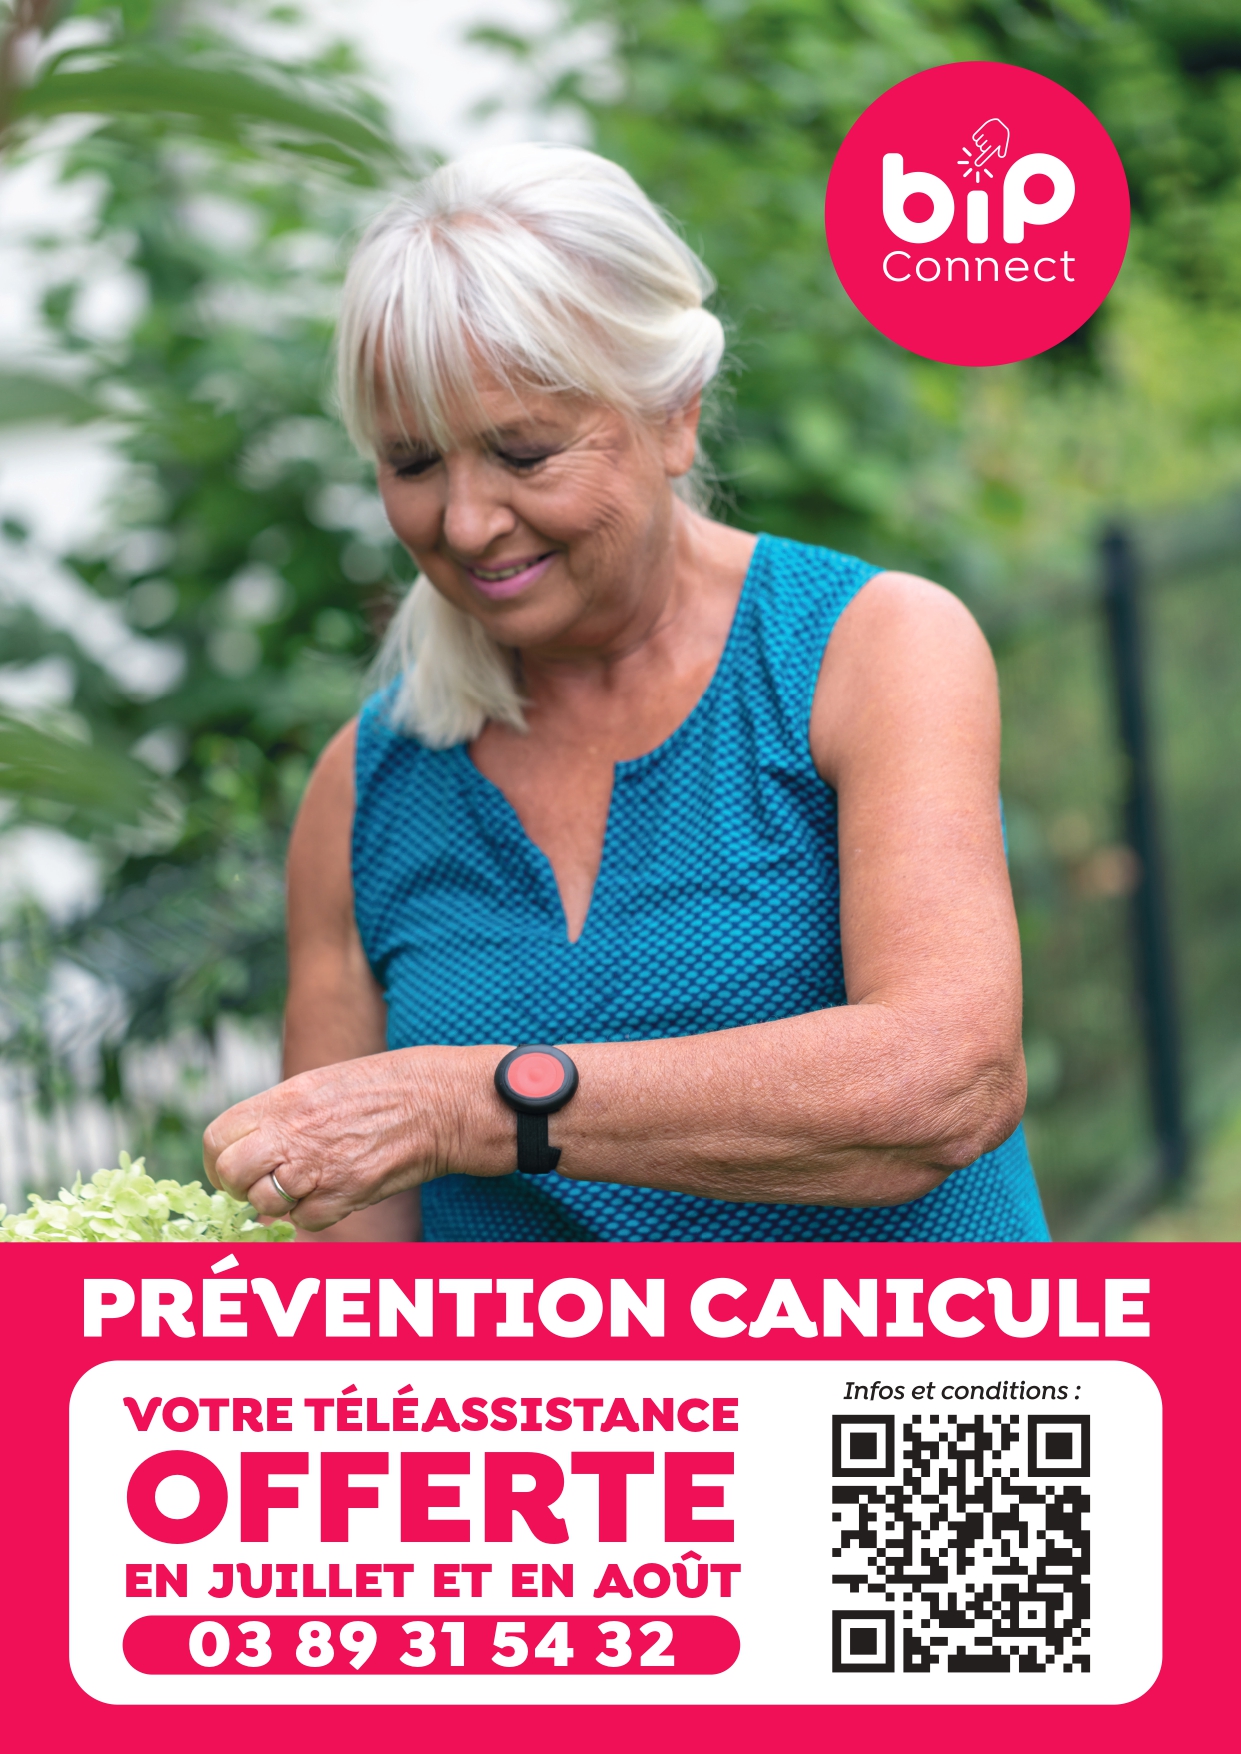 prevention_canicule_bip_connect